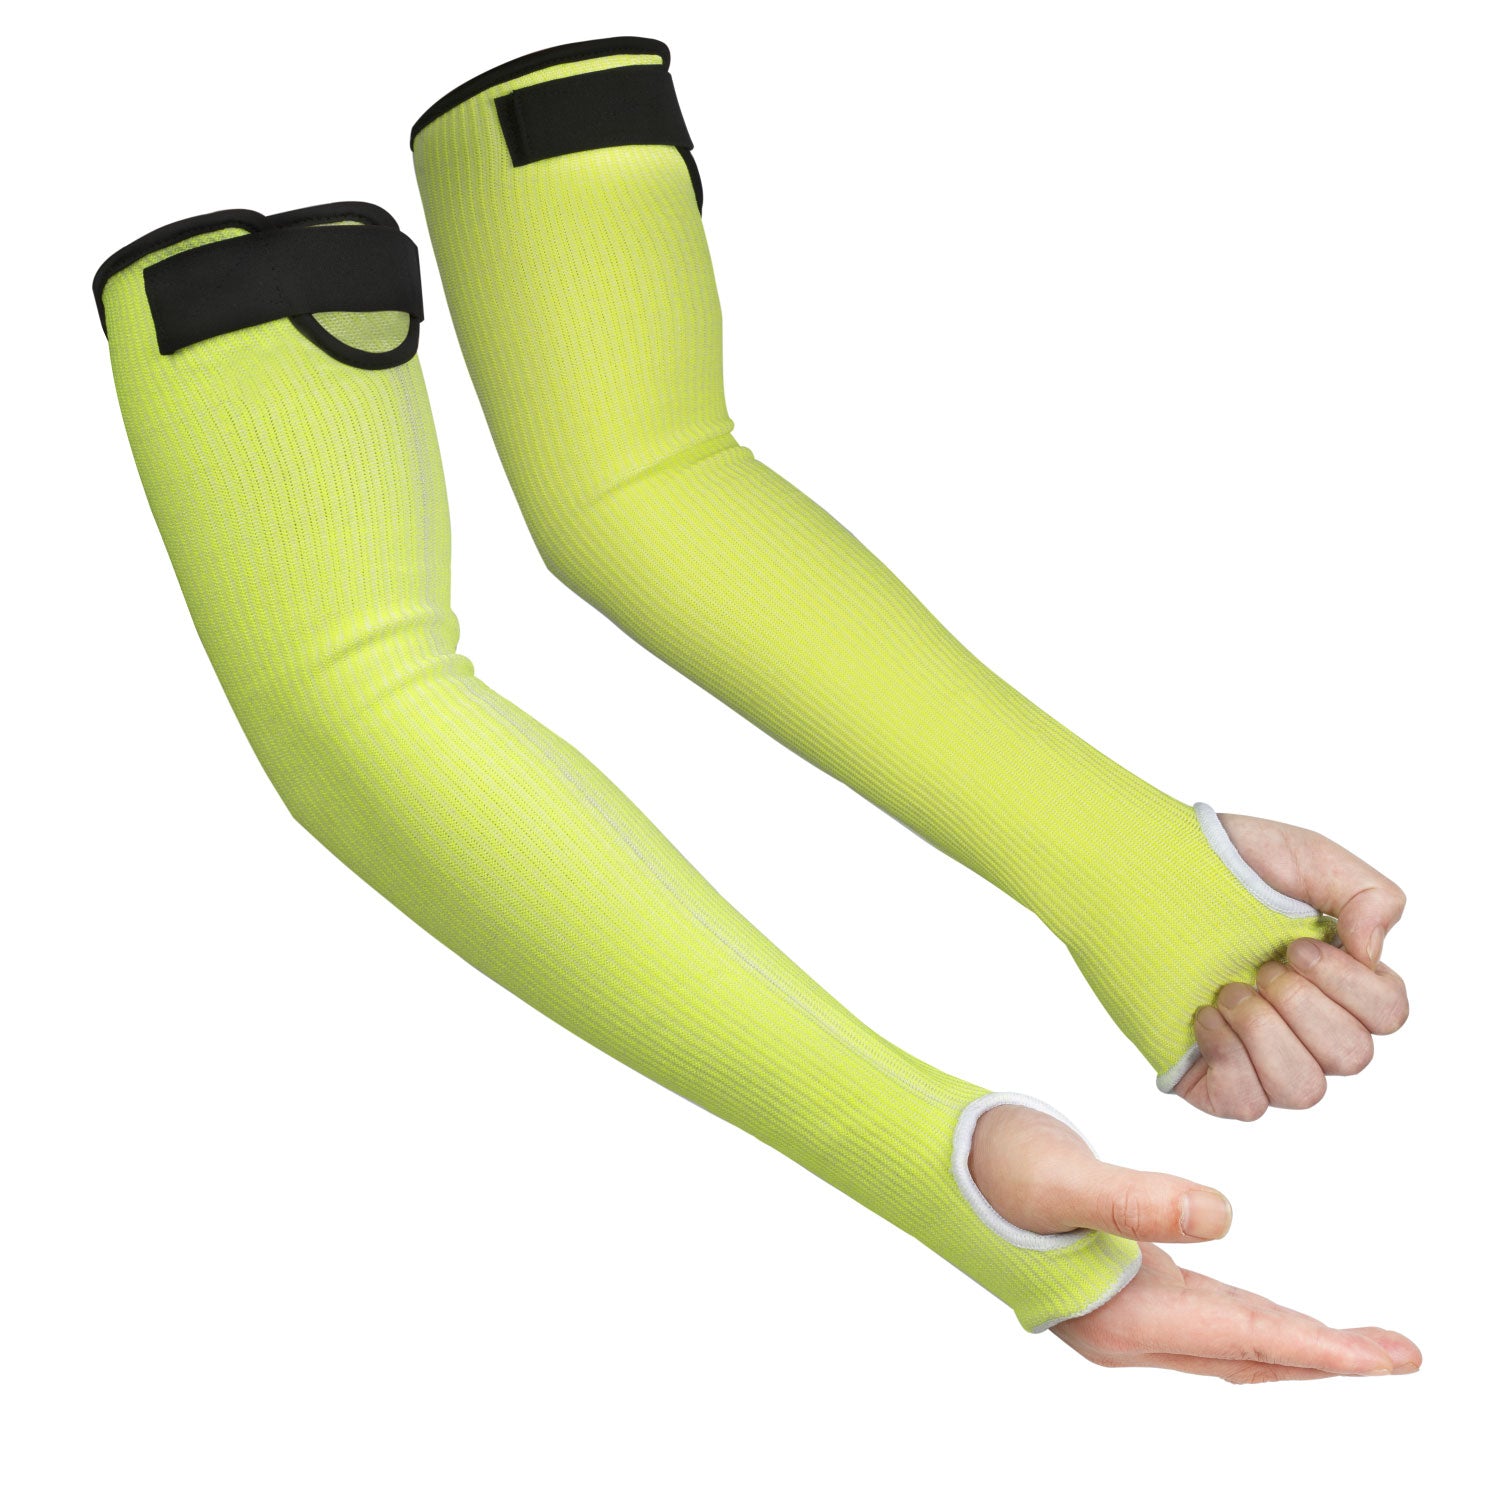 Kevlar Sleeves for Arm Protection, Prevent Cuts and Bruises, Cut Resistant with Thumb Hole